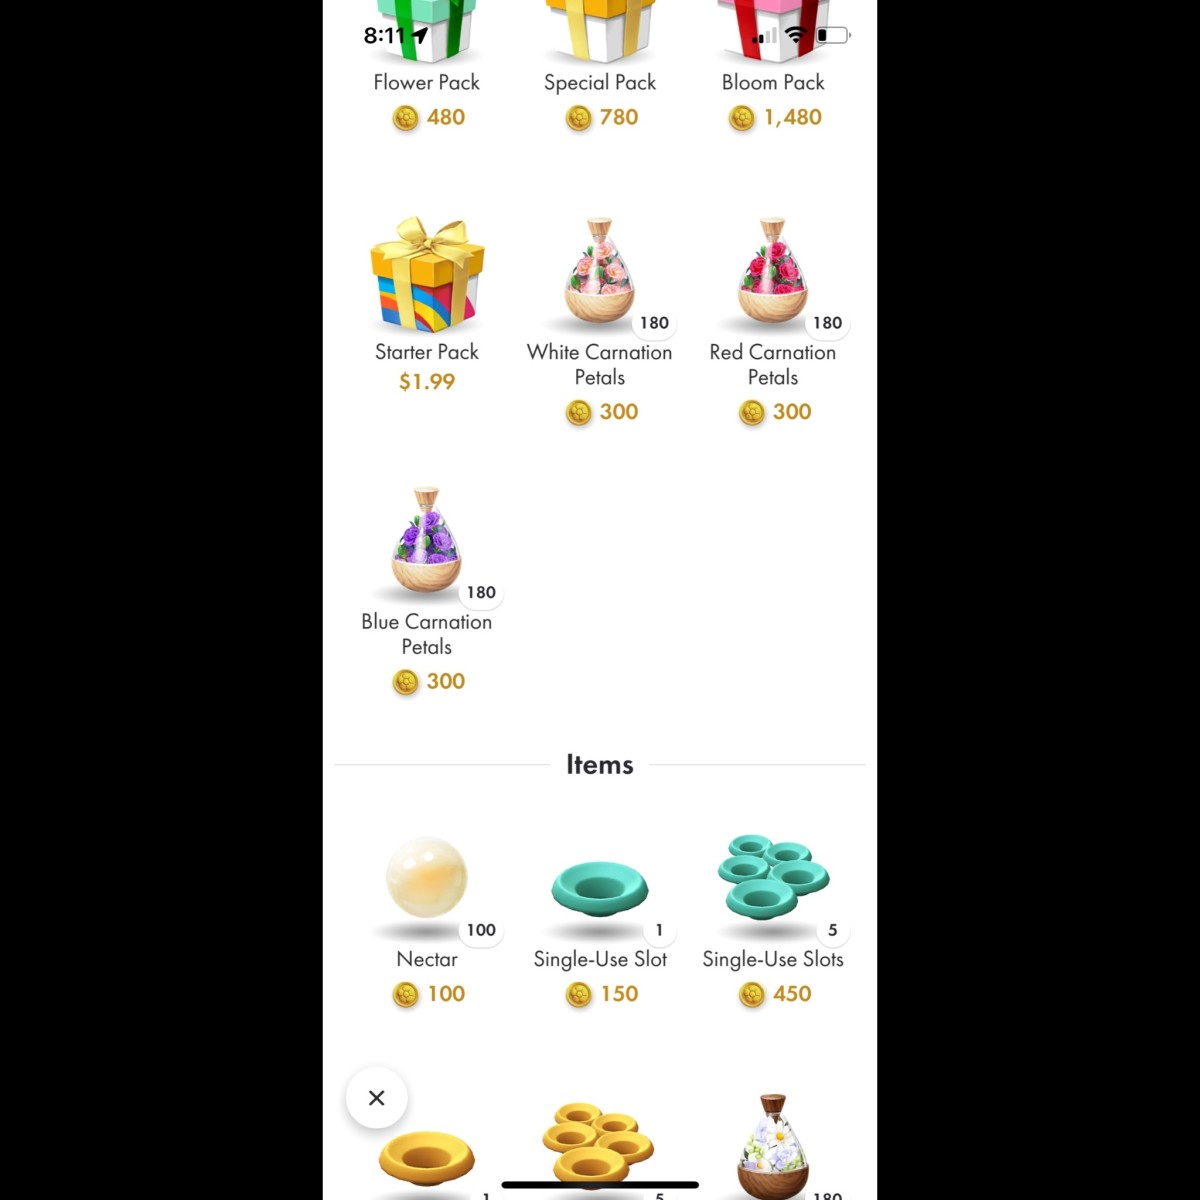 Here, you can see different items that can be purchased in the store in the game with tokens and/or real money.